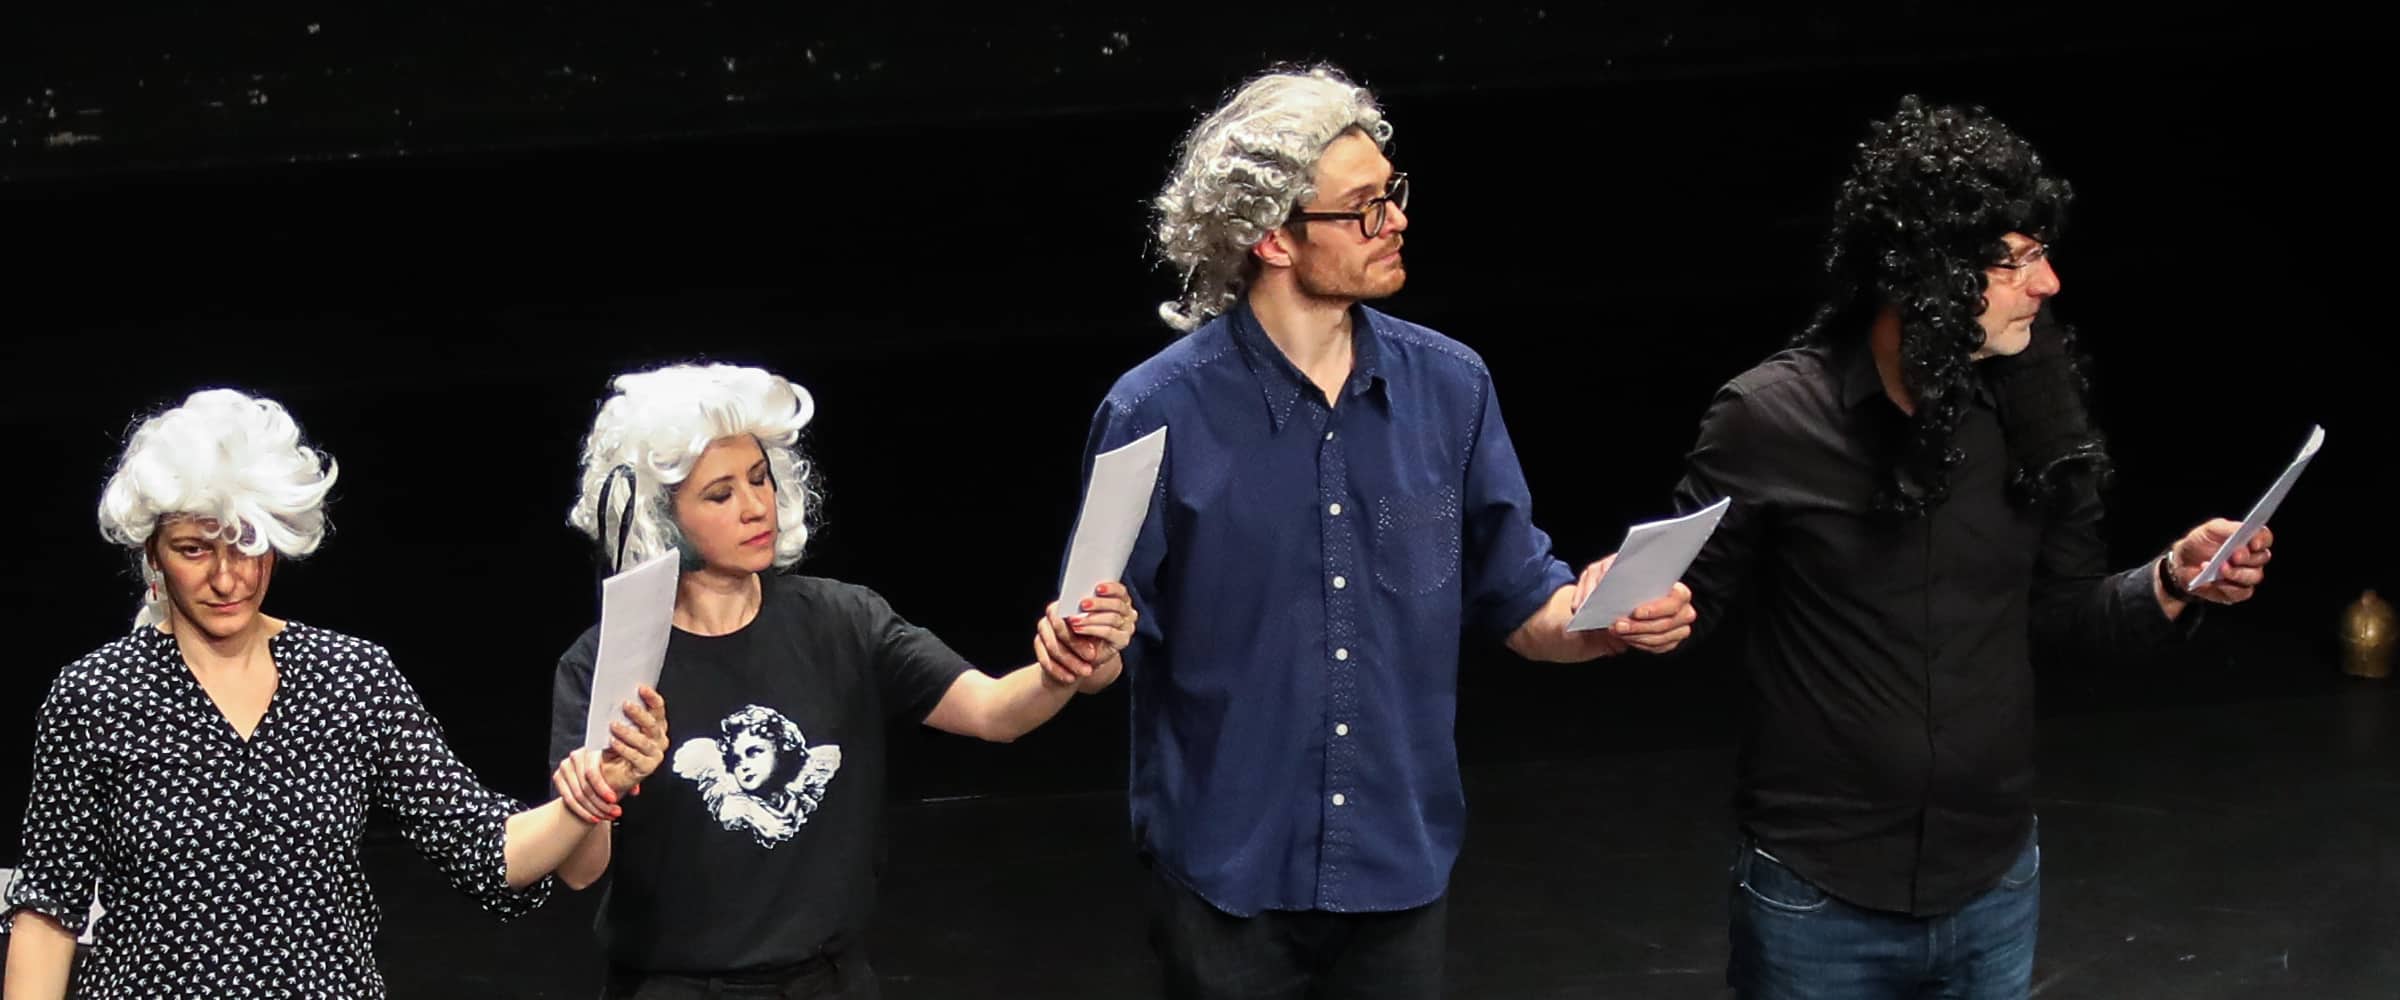 Performers wearing wigs dance with scores in their hands